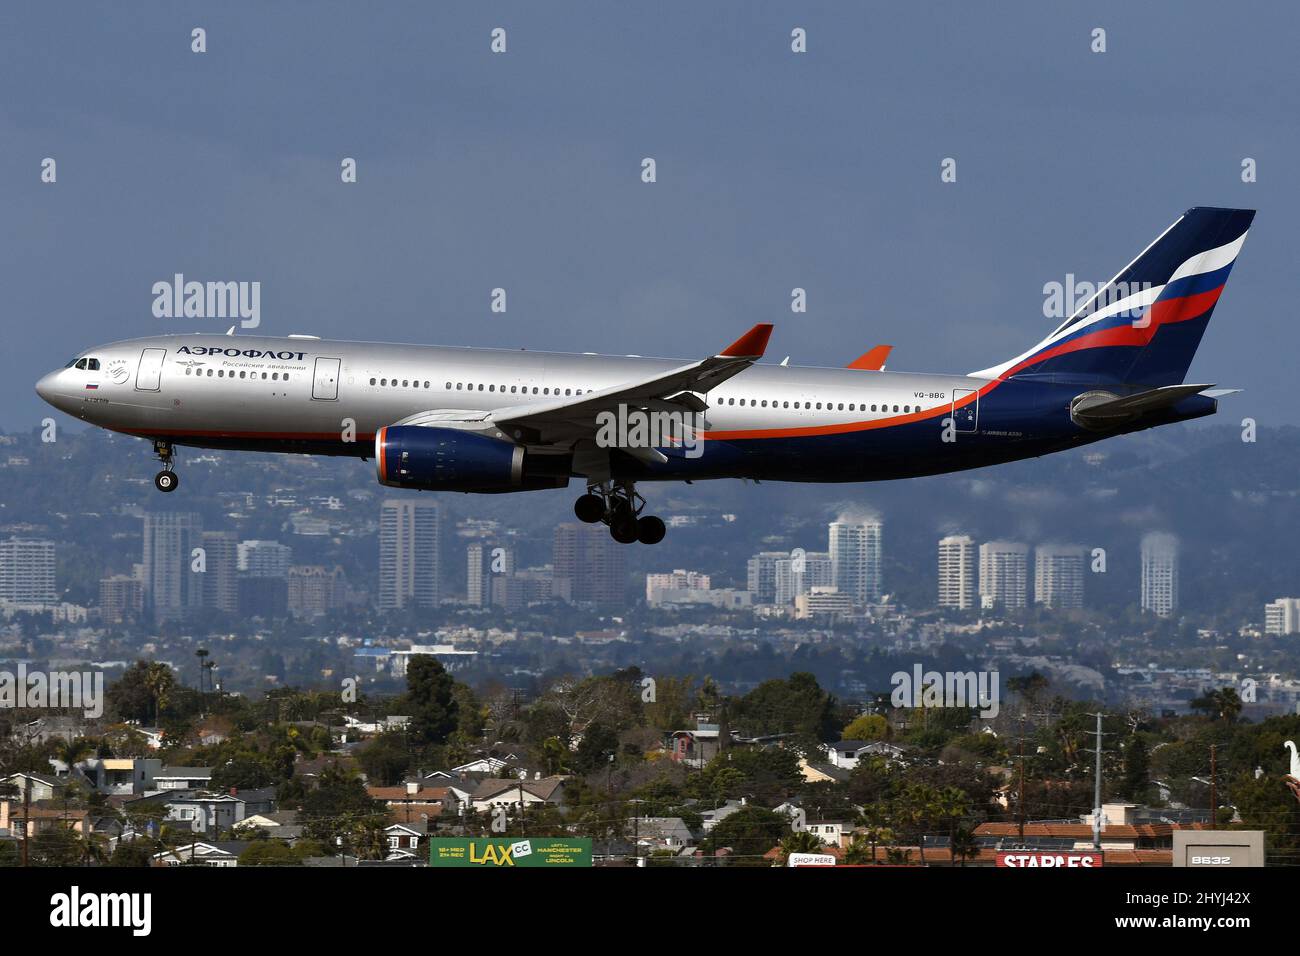 AEROFLOT AIRBUS A330. BERMUDA REGISTRATION CANCELLED BY LEASING COMPANY DUE TO RUSSIAN INVASION OF UKRAINE IN 2022. Stock Photo